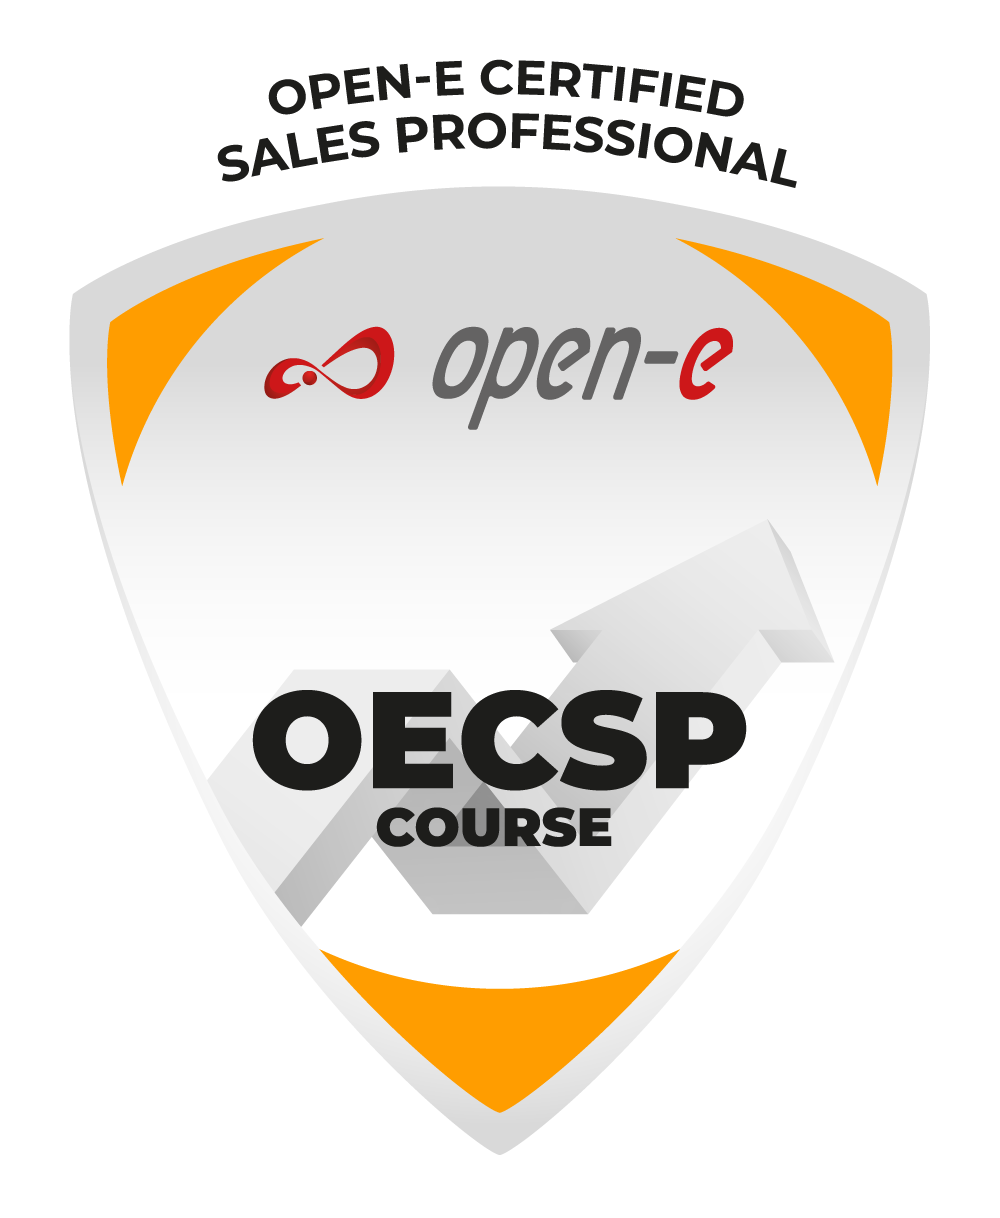 Open-E Certified Sales Professional Course OECSP badge